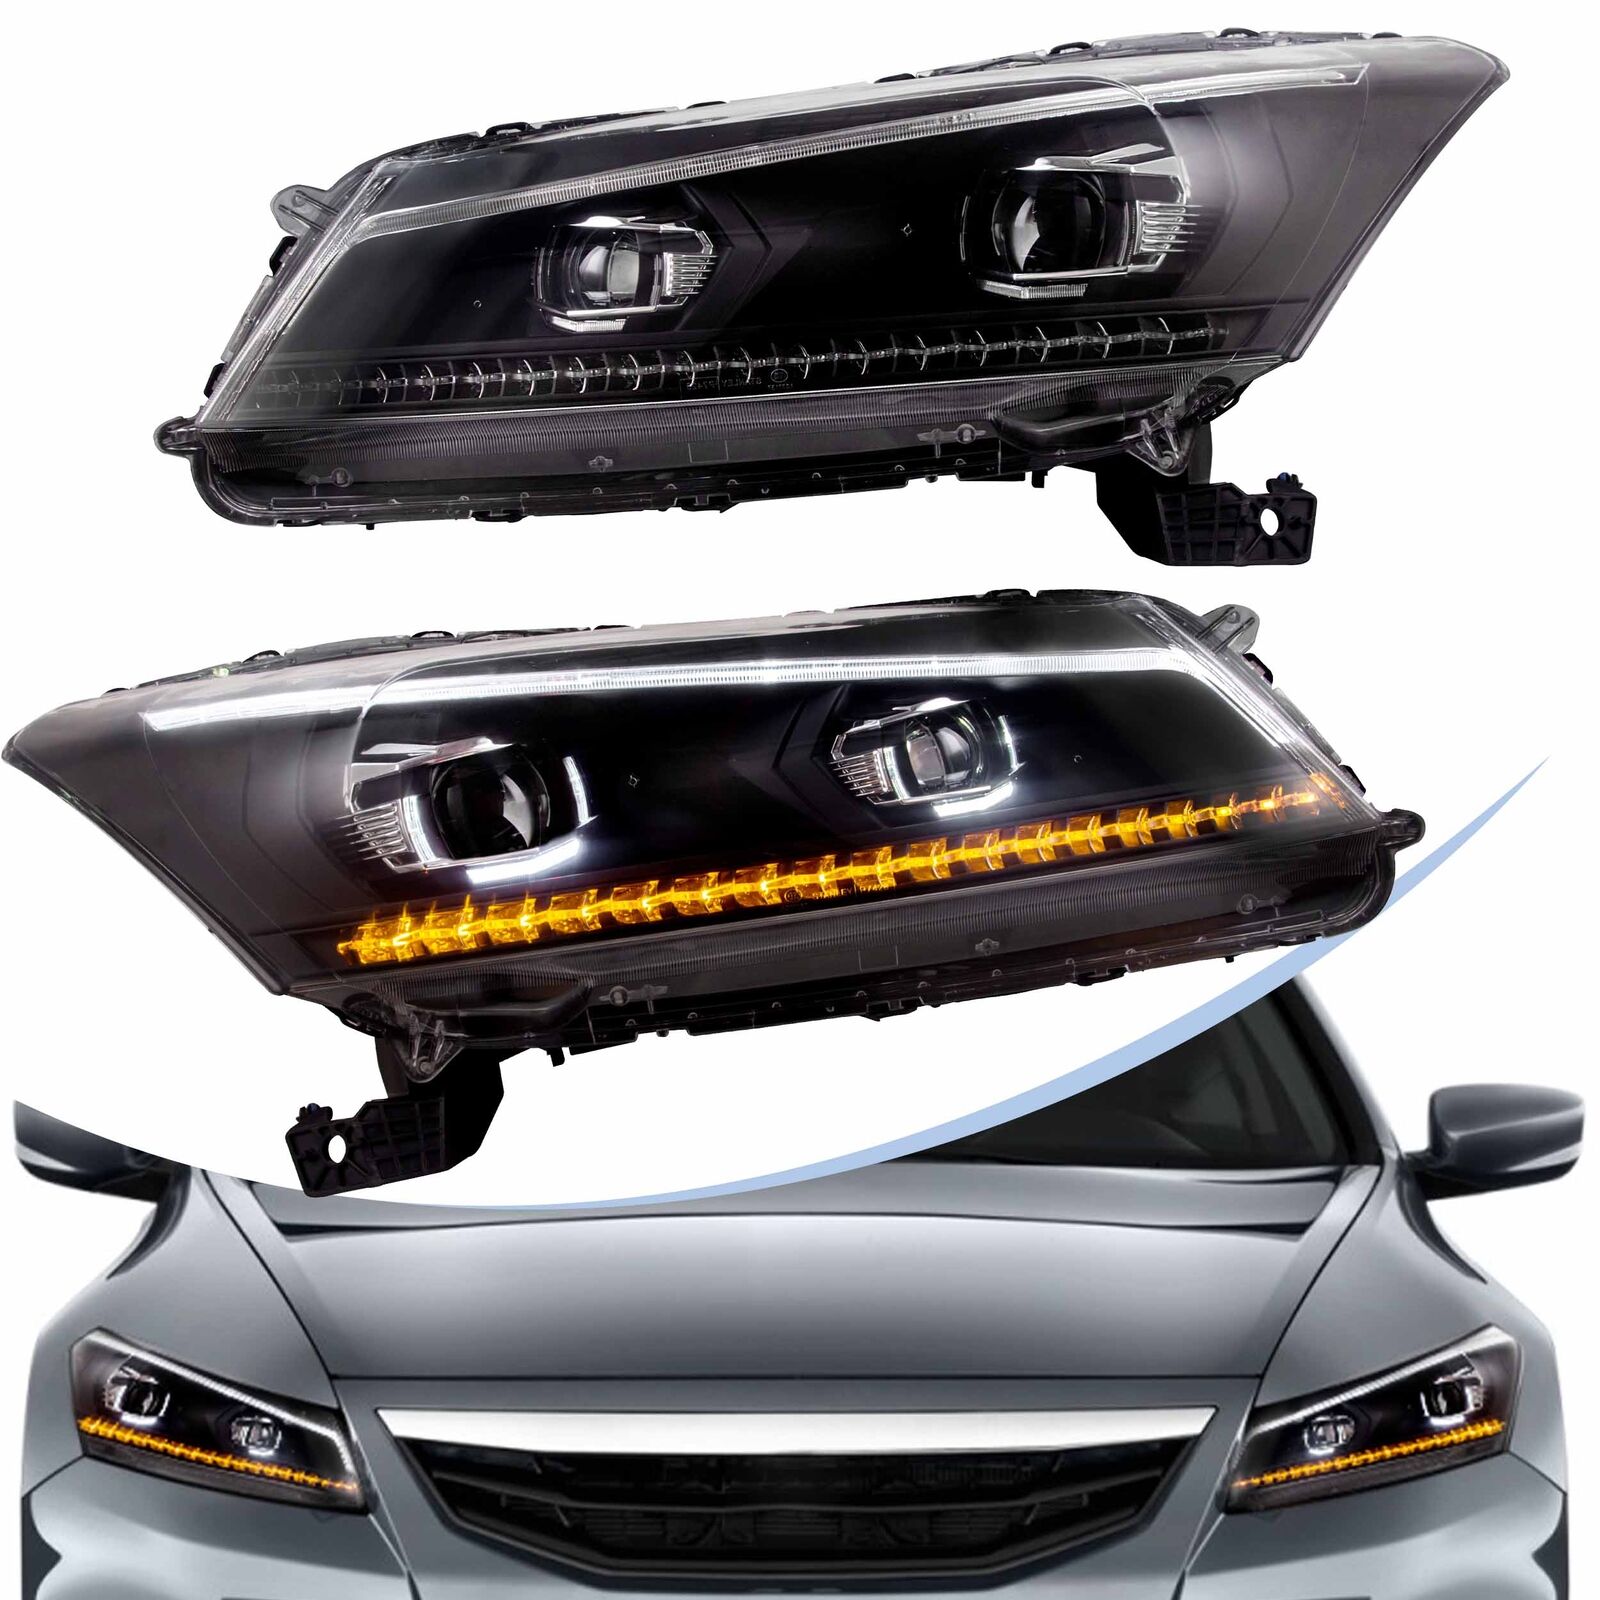 2x VLAND LED Headlights For 2008-2012 Honda Accord w/Sequential Trun Signal DRL